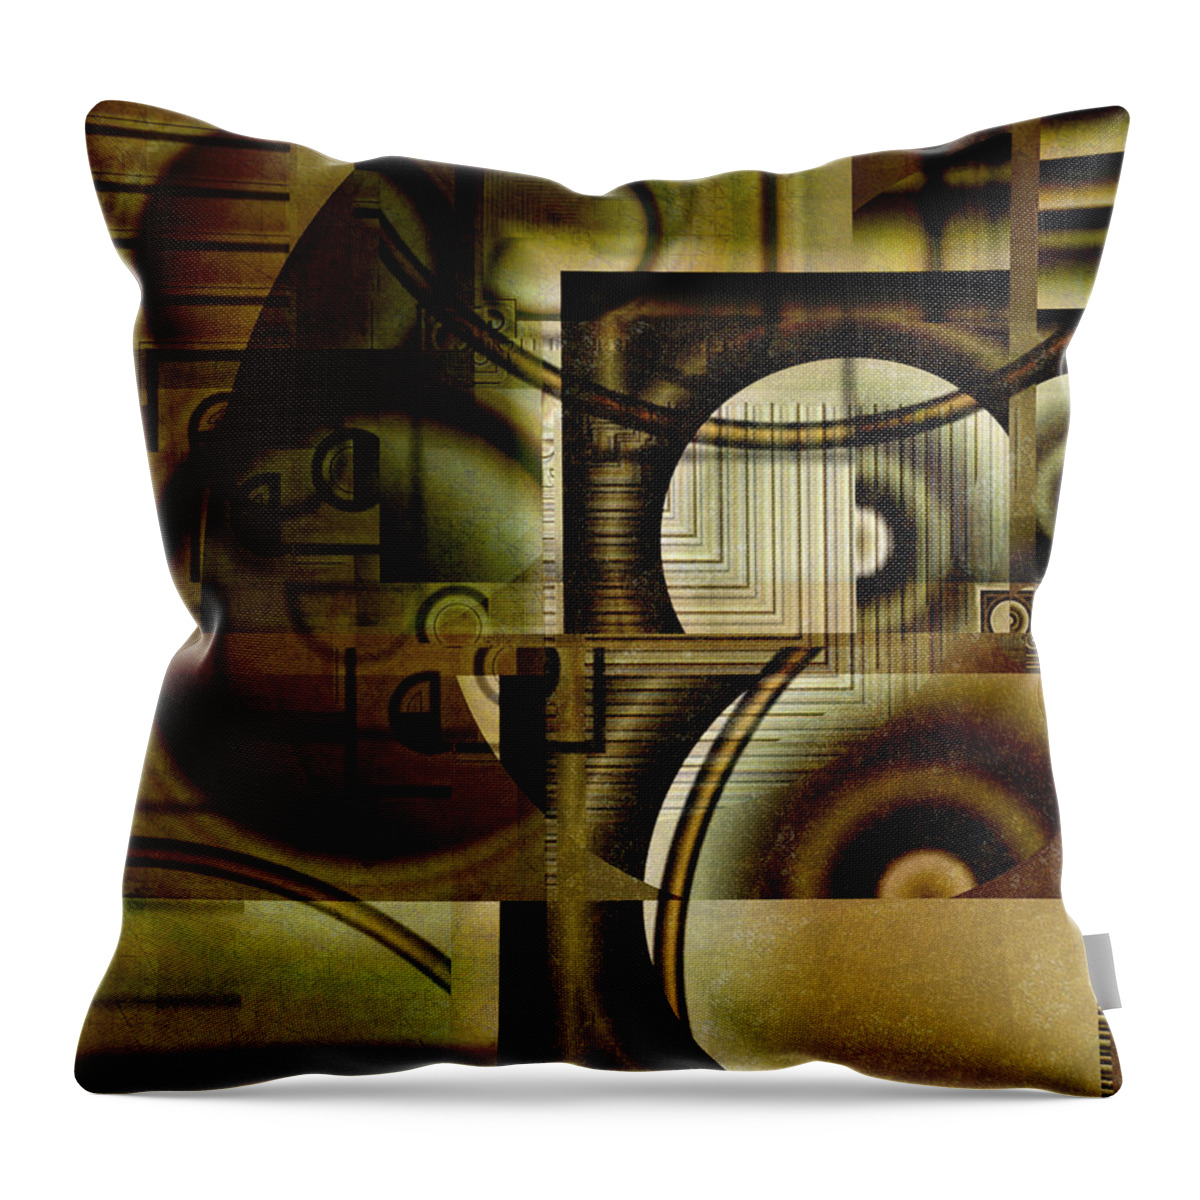 Vic Eberly Throw Pillow featuring the digital art Surround Sound by Vic Eberly